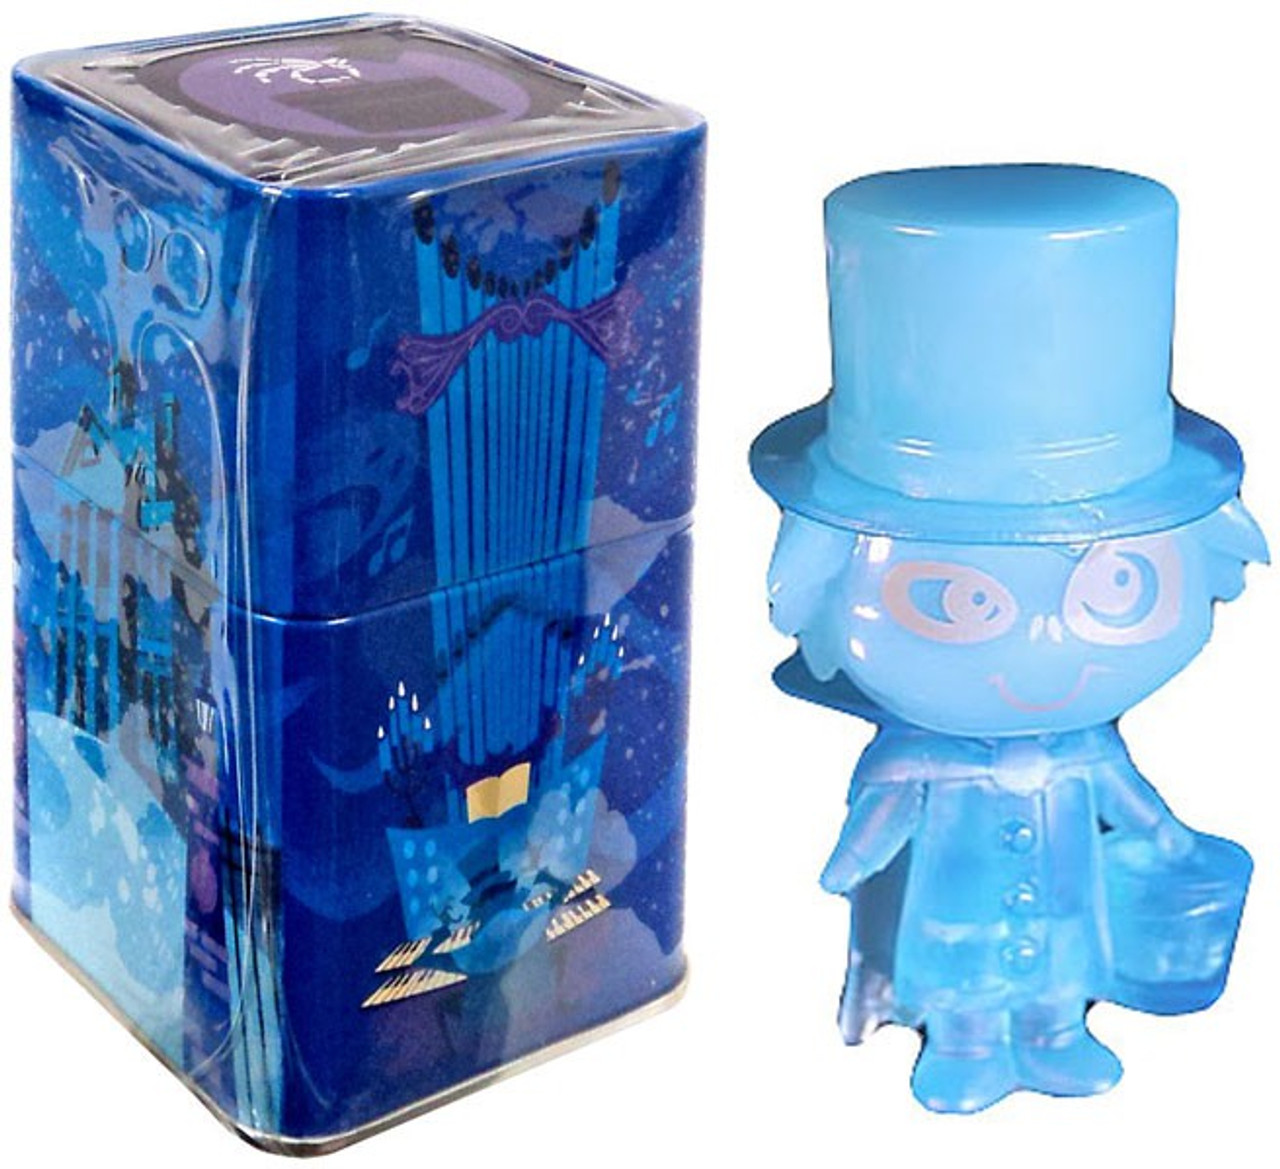 Funko Disney The Haunted Mansion Hatbox Ghost Exclusive Mystery Mini Figure Tin Haunted Forest Toywiz - new roblox 2017 girl guest blind mystery mini figure game